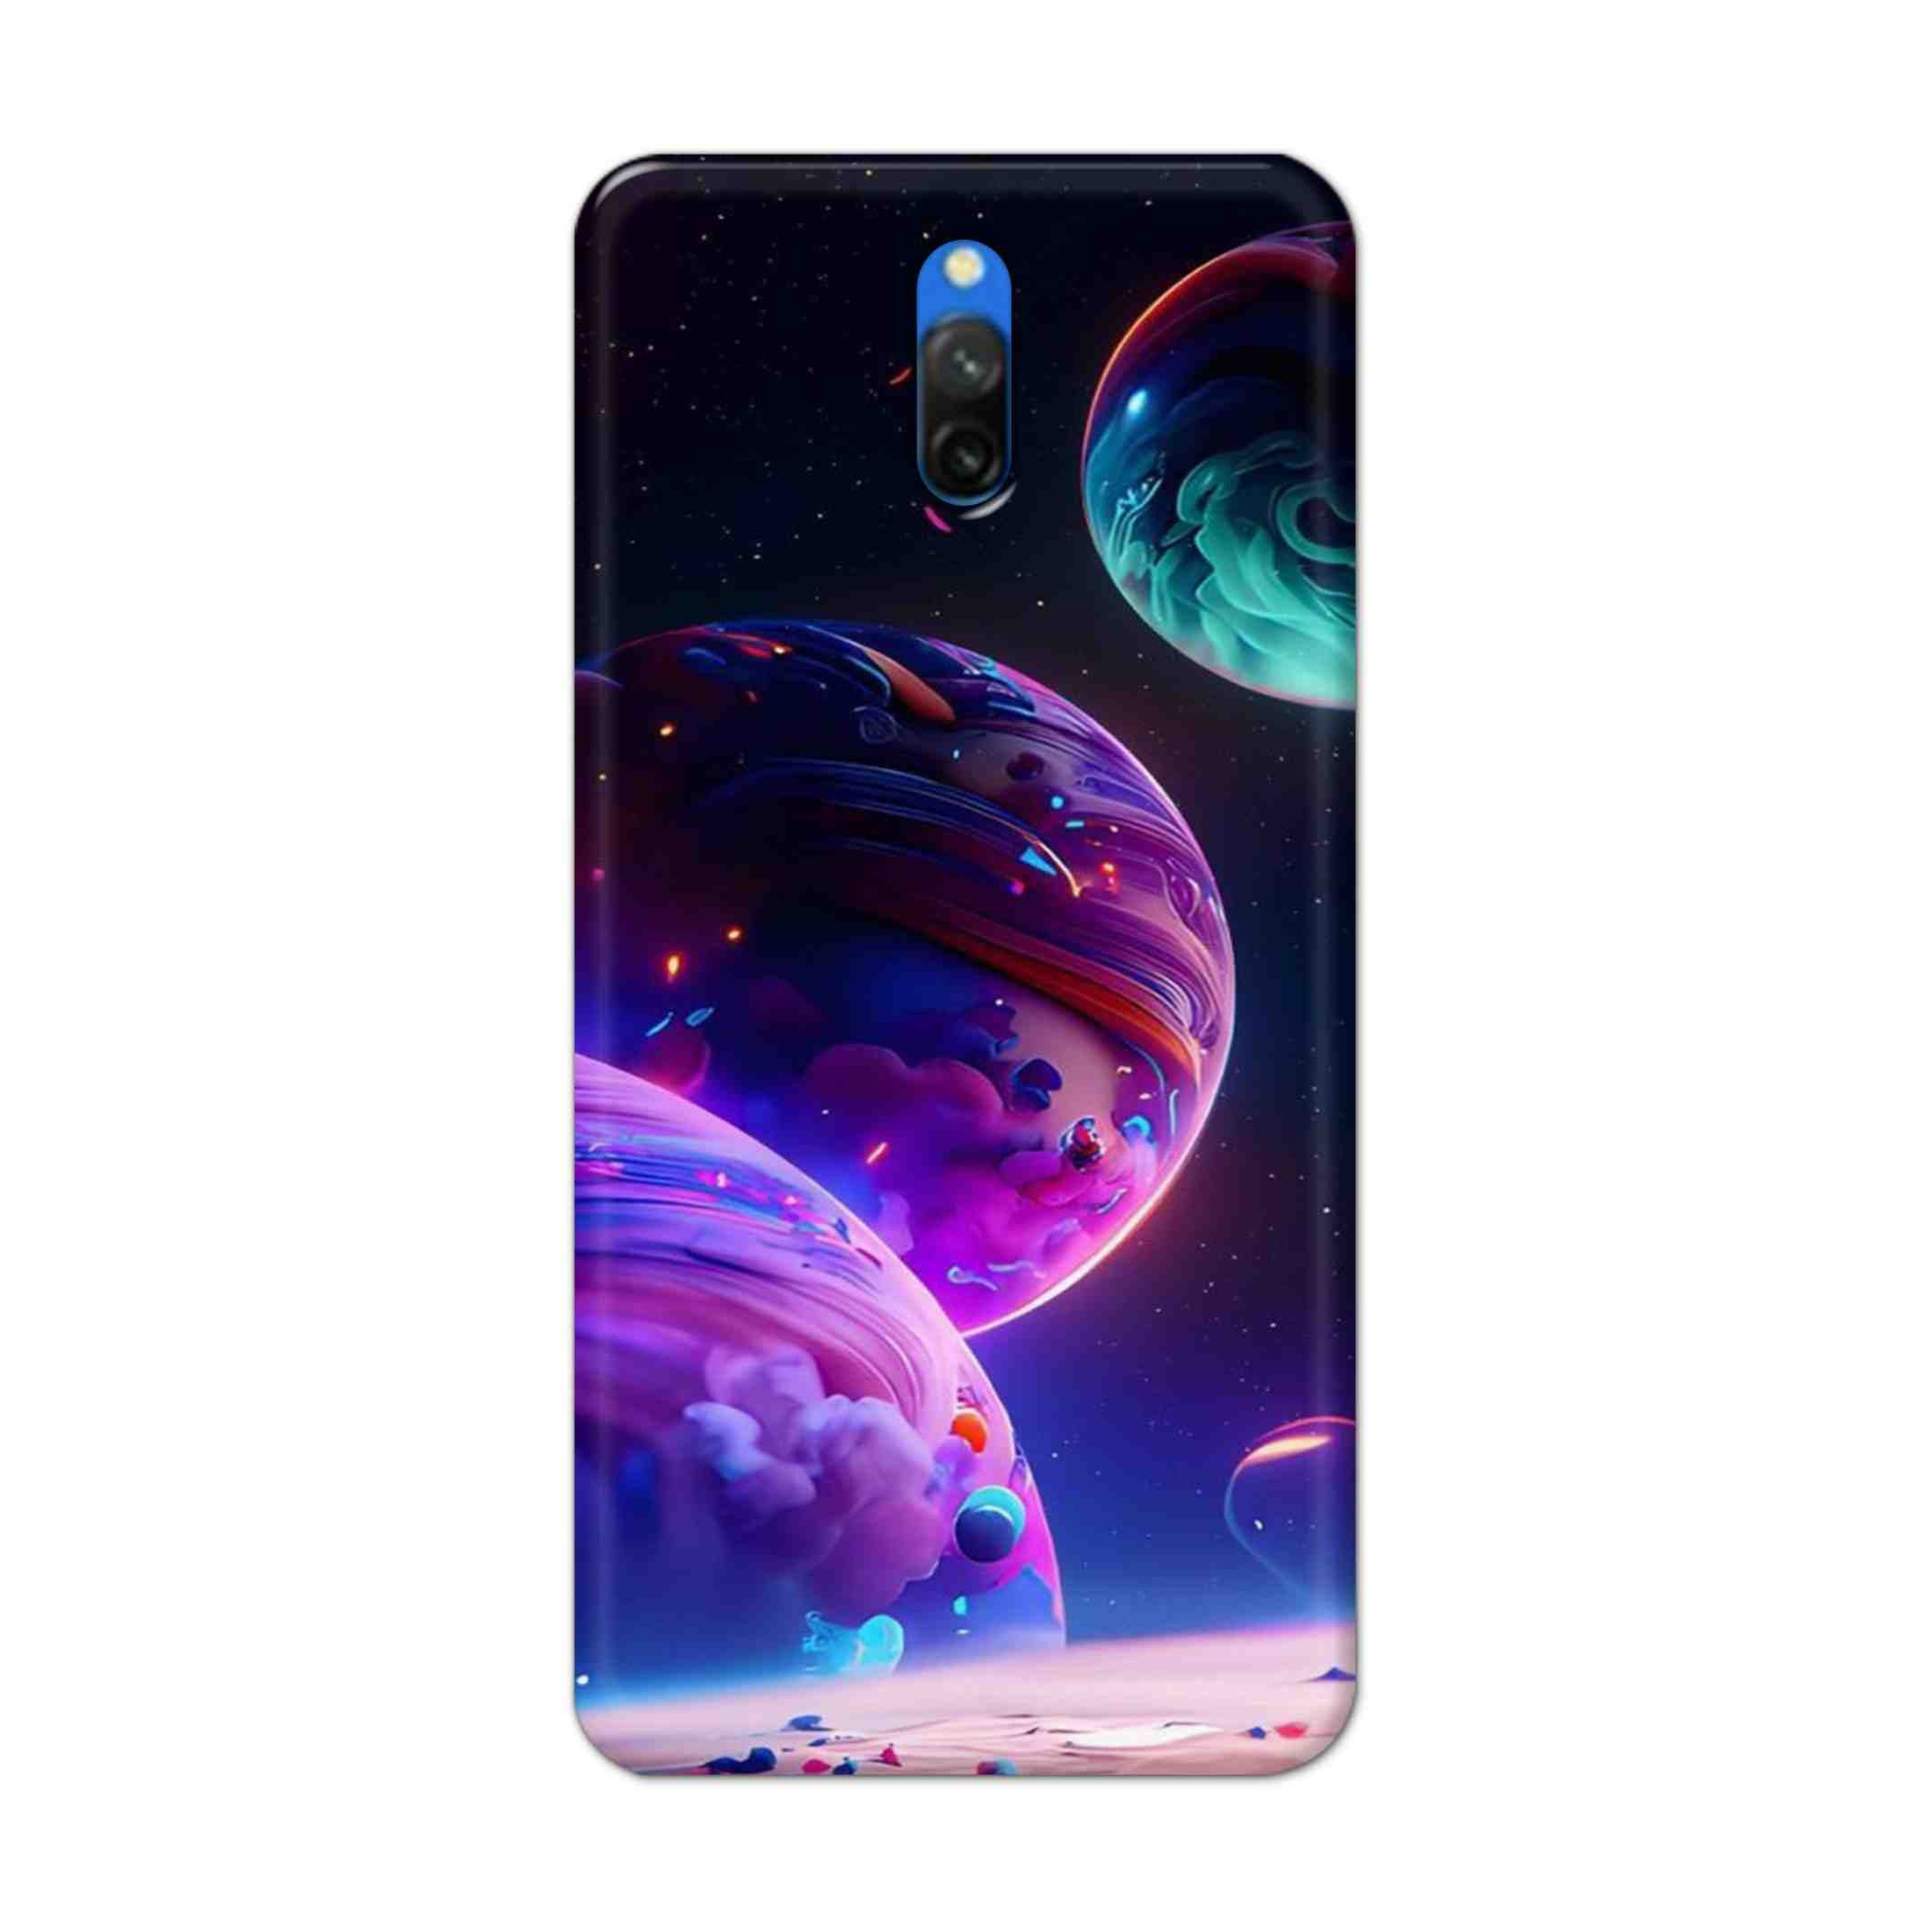 Buy 3 Earth Hard Back Mobile Phone Case/Cover For Redmi 8A Dual Online